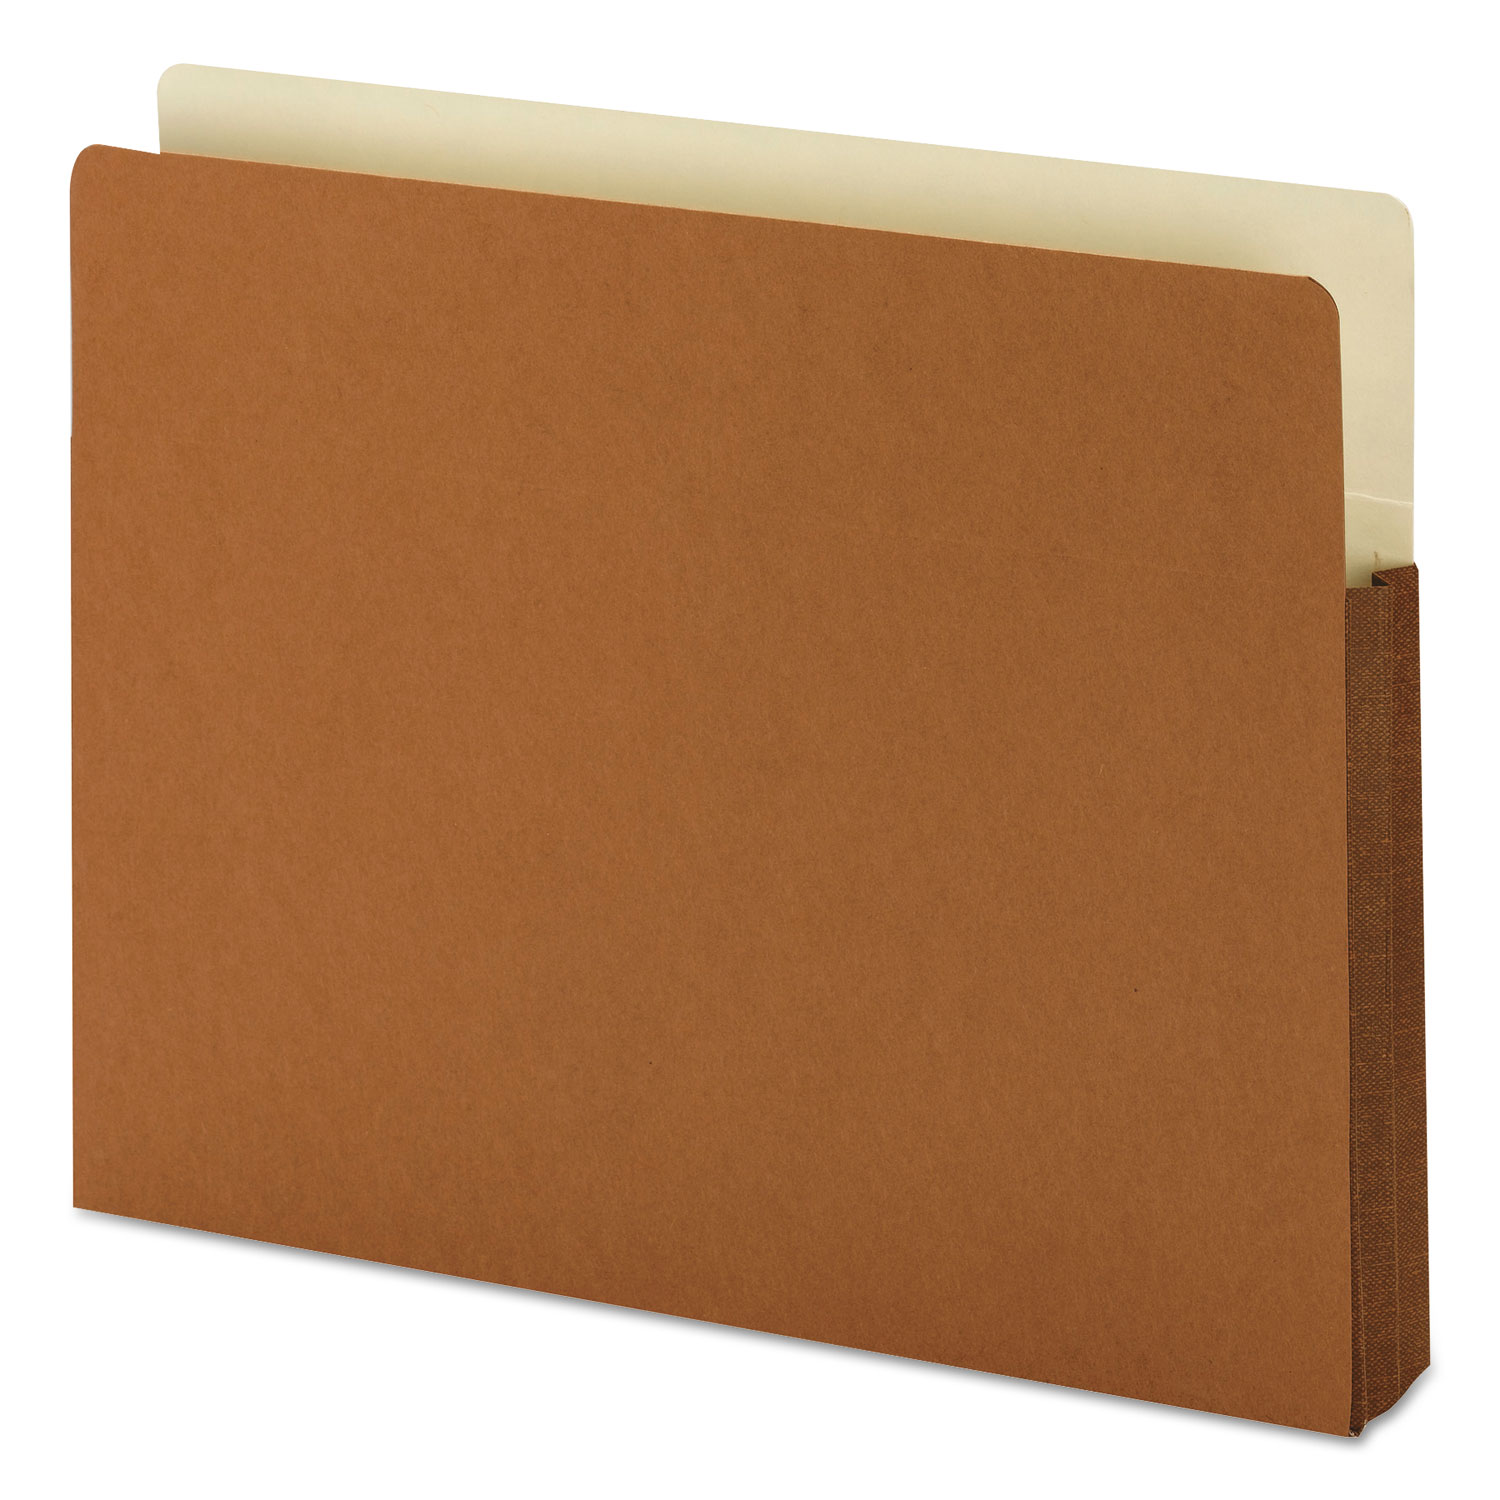 Redrope Drop Front File Pockets w/ Tyvek Lined Gussets, 1.75